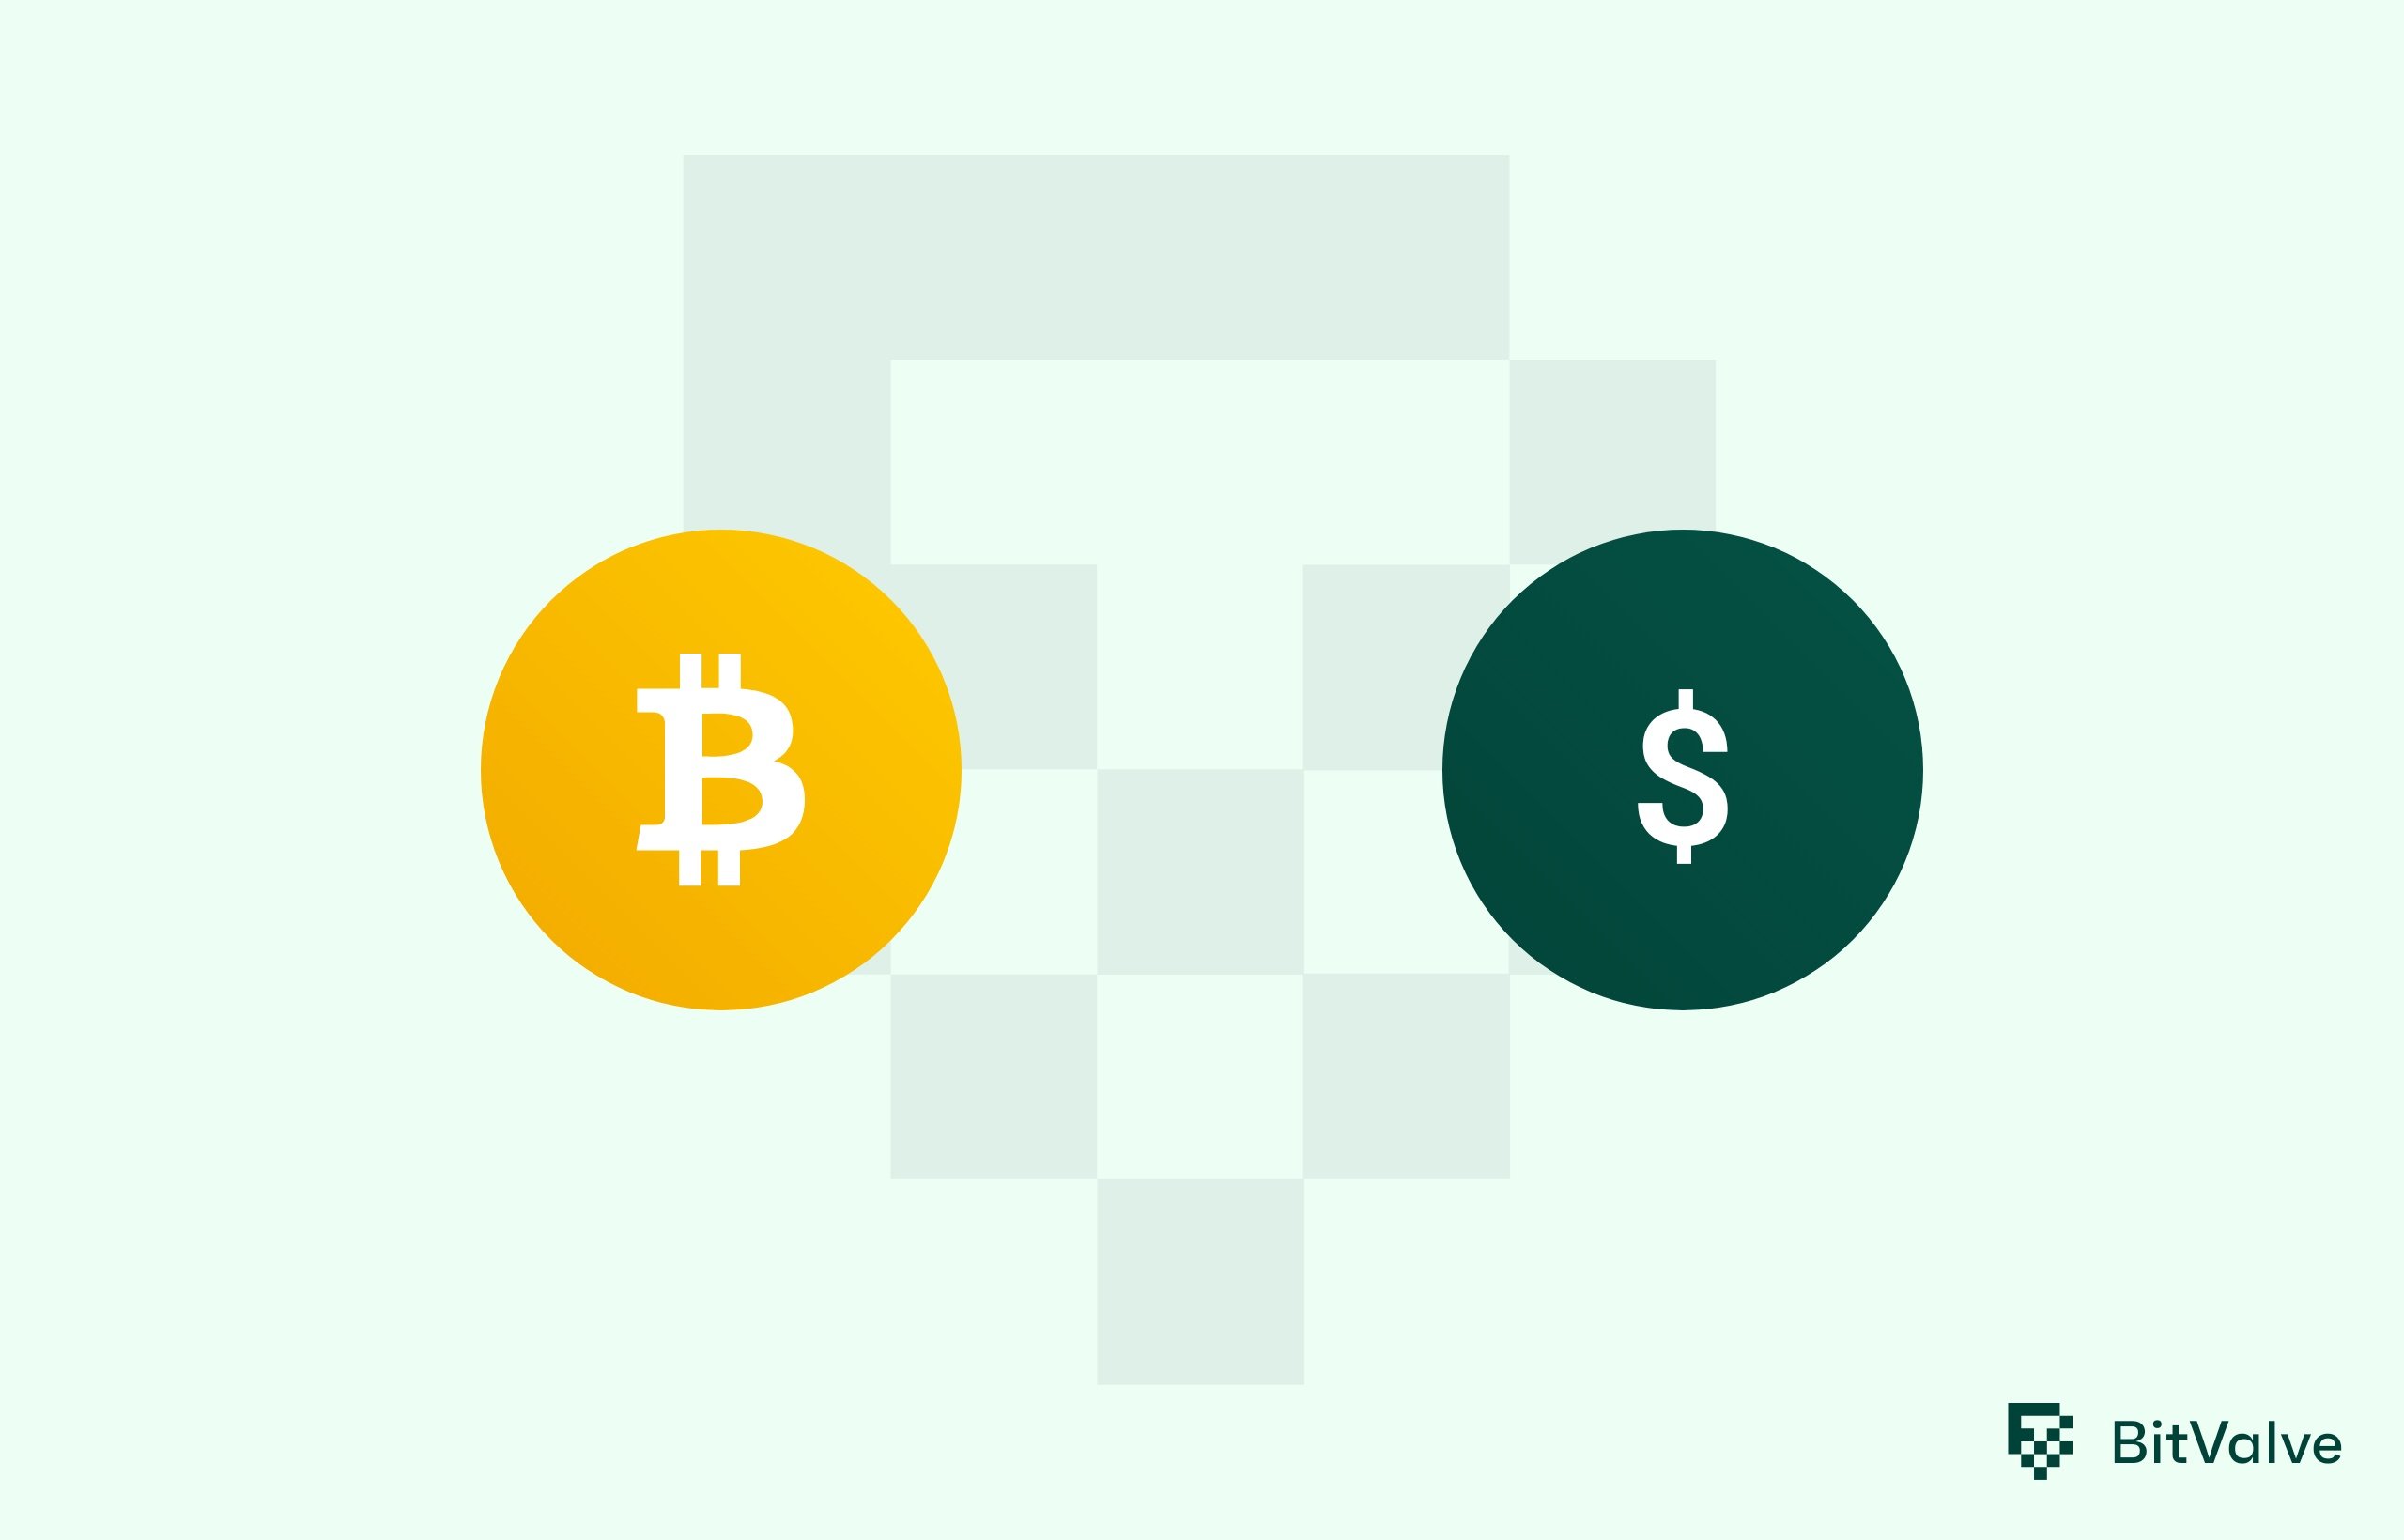 1 USD to BTC - US Dollars to Bitcoins Exchange Rate